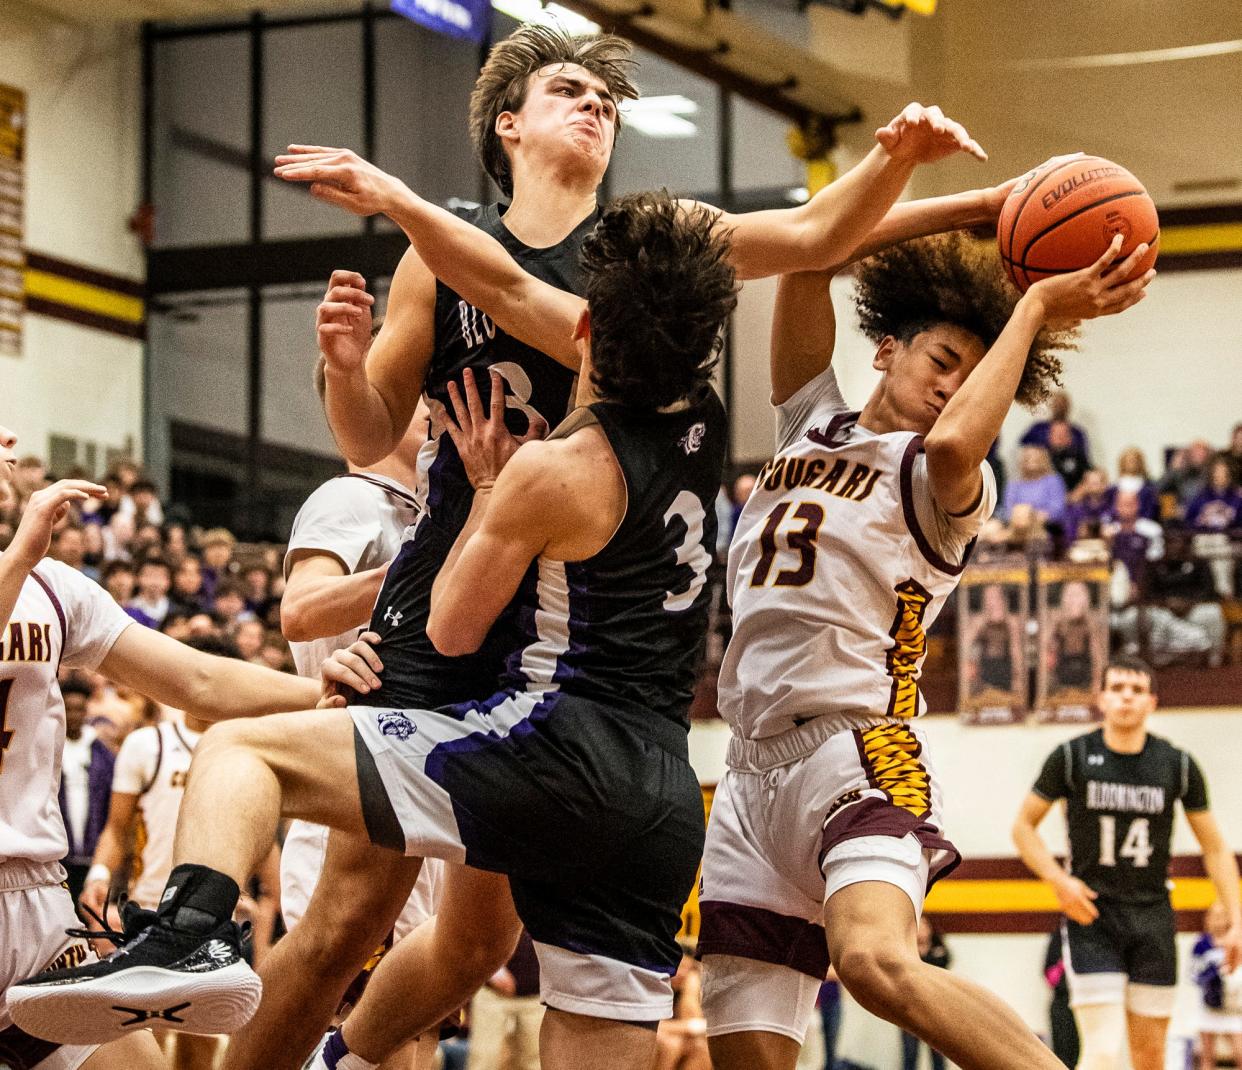 North's Derrick Cross Jr. (14) grabs a rebound during the Bloomington North versus Bloomington South boys basketball game at Bloomington High School North on Friday, Jan. 5, 2024. North won the game 56-53.